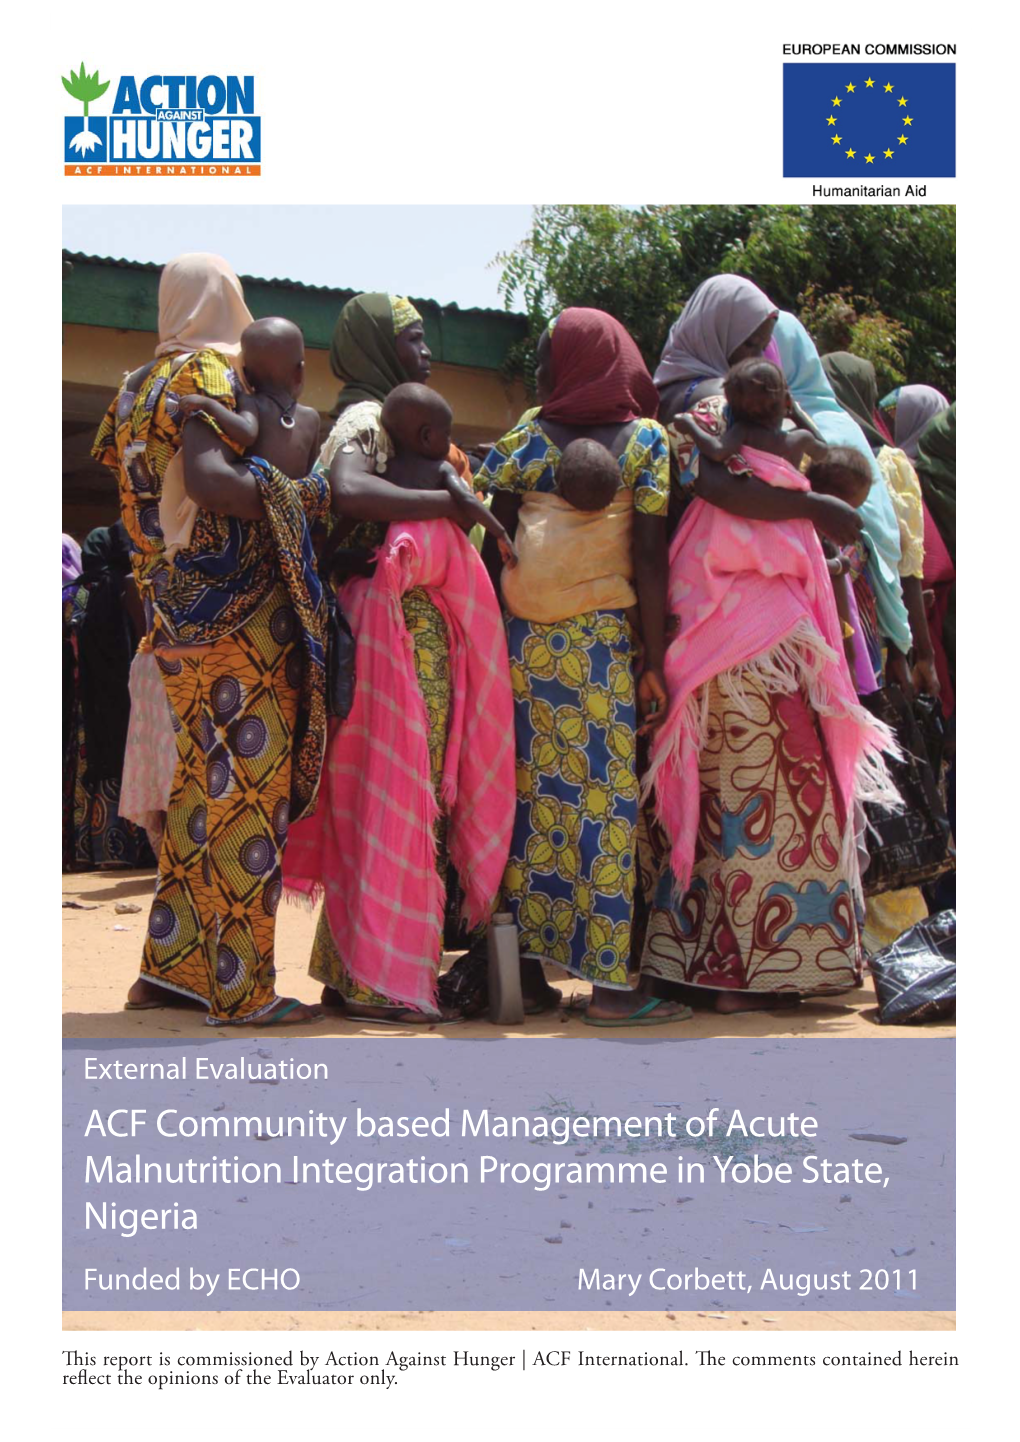 ACF Community Based Management of Acute Malnutrition Integration Programme in Yobe State, Nigeria Funded by ECHO Mary Corbett, August 2011